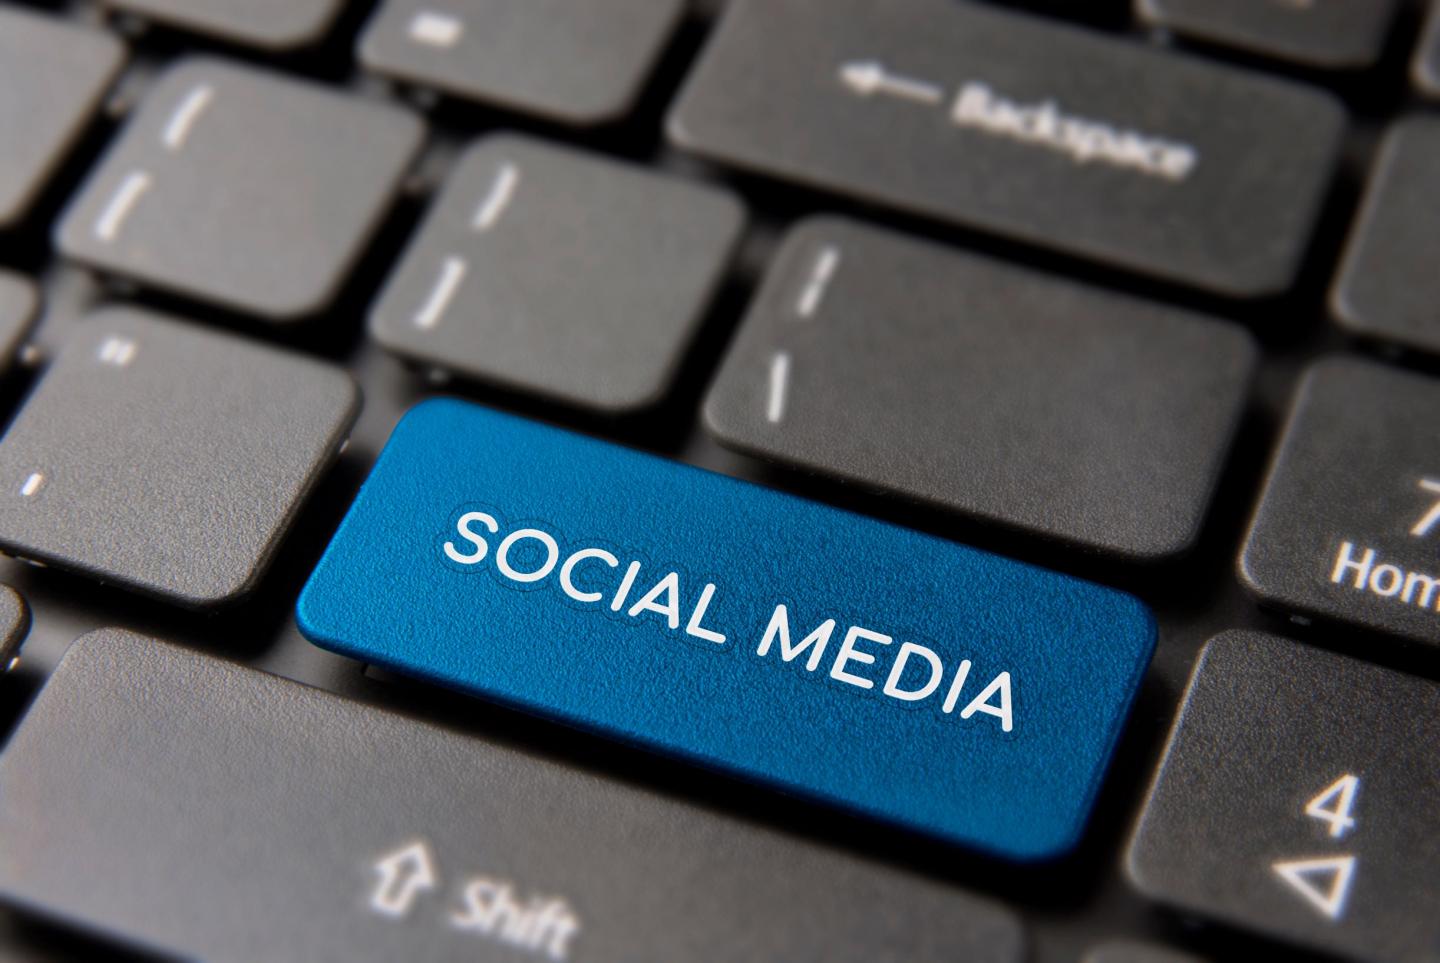 SMEs have become increasingly dependent on social media during the pandemic